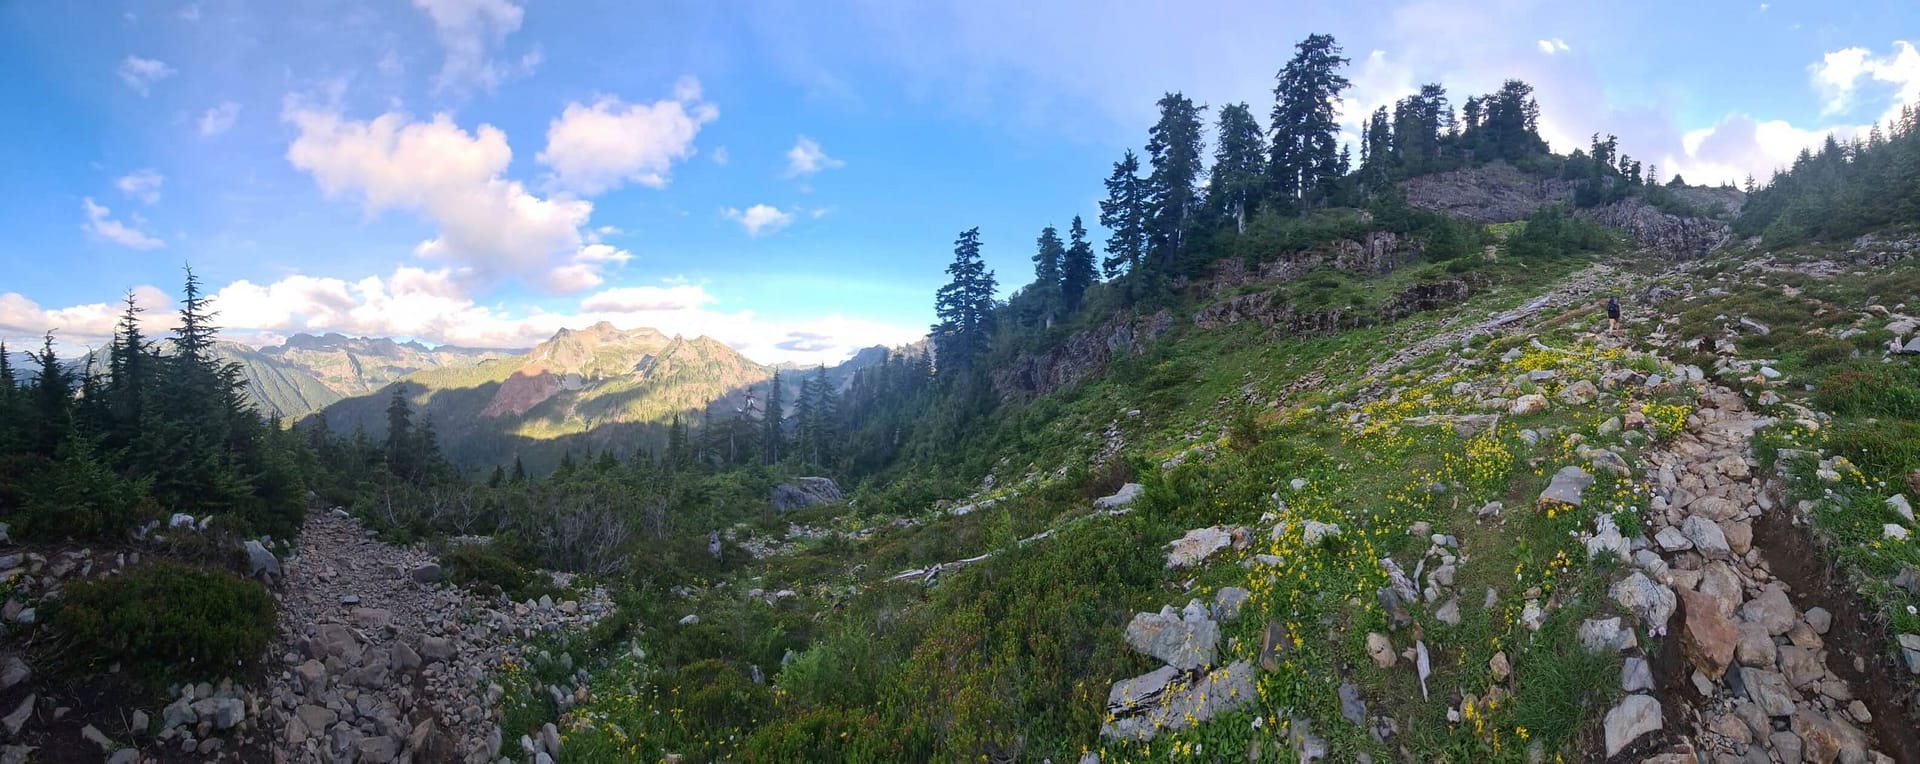 panoramic view of gothic basin trail in verlot, washington, wildflowers and mountain views